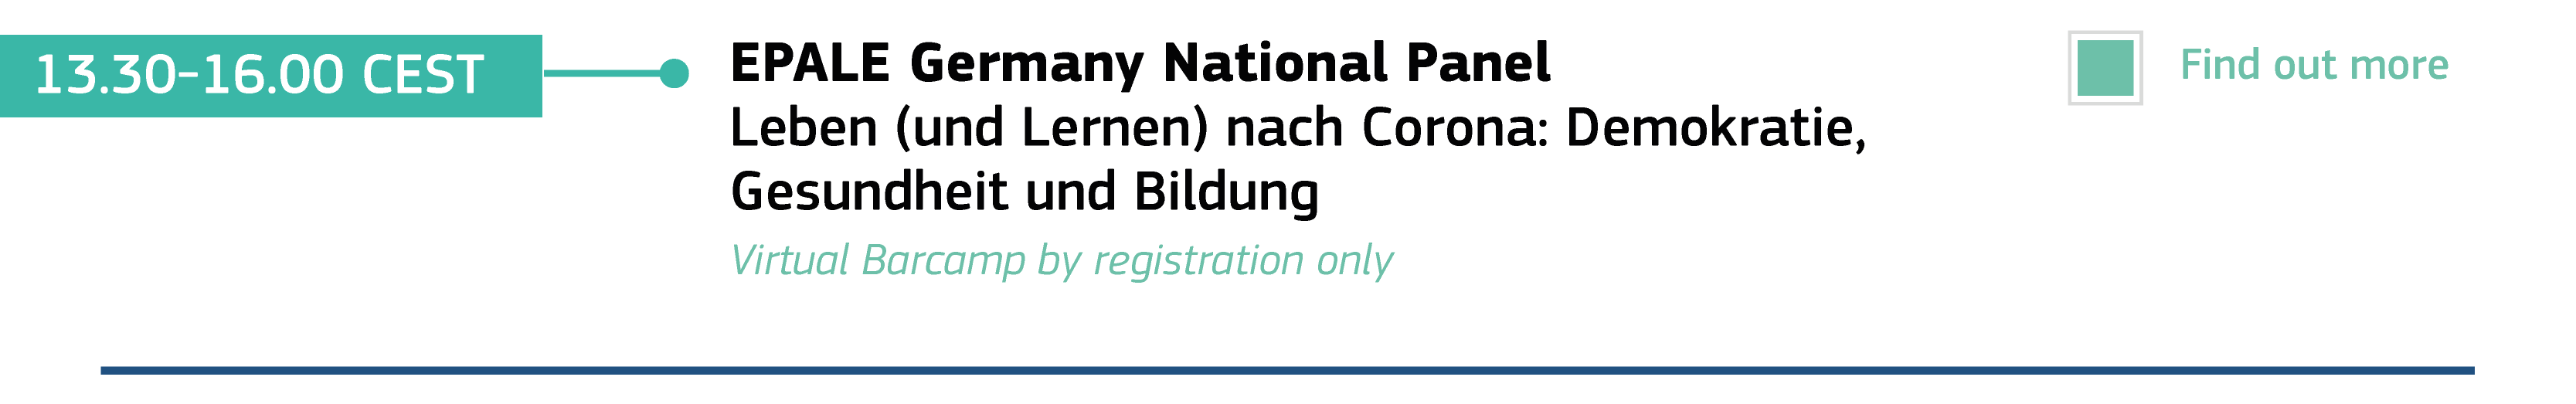 National Panel 19 October - Germany